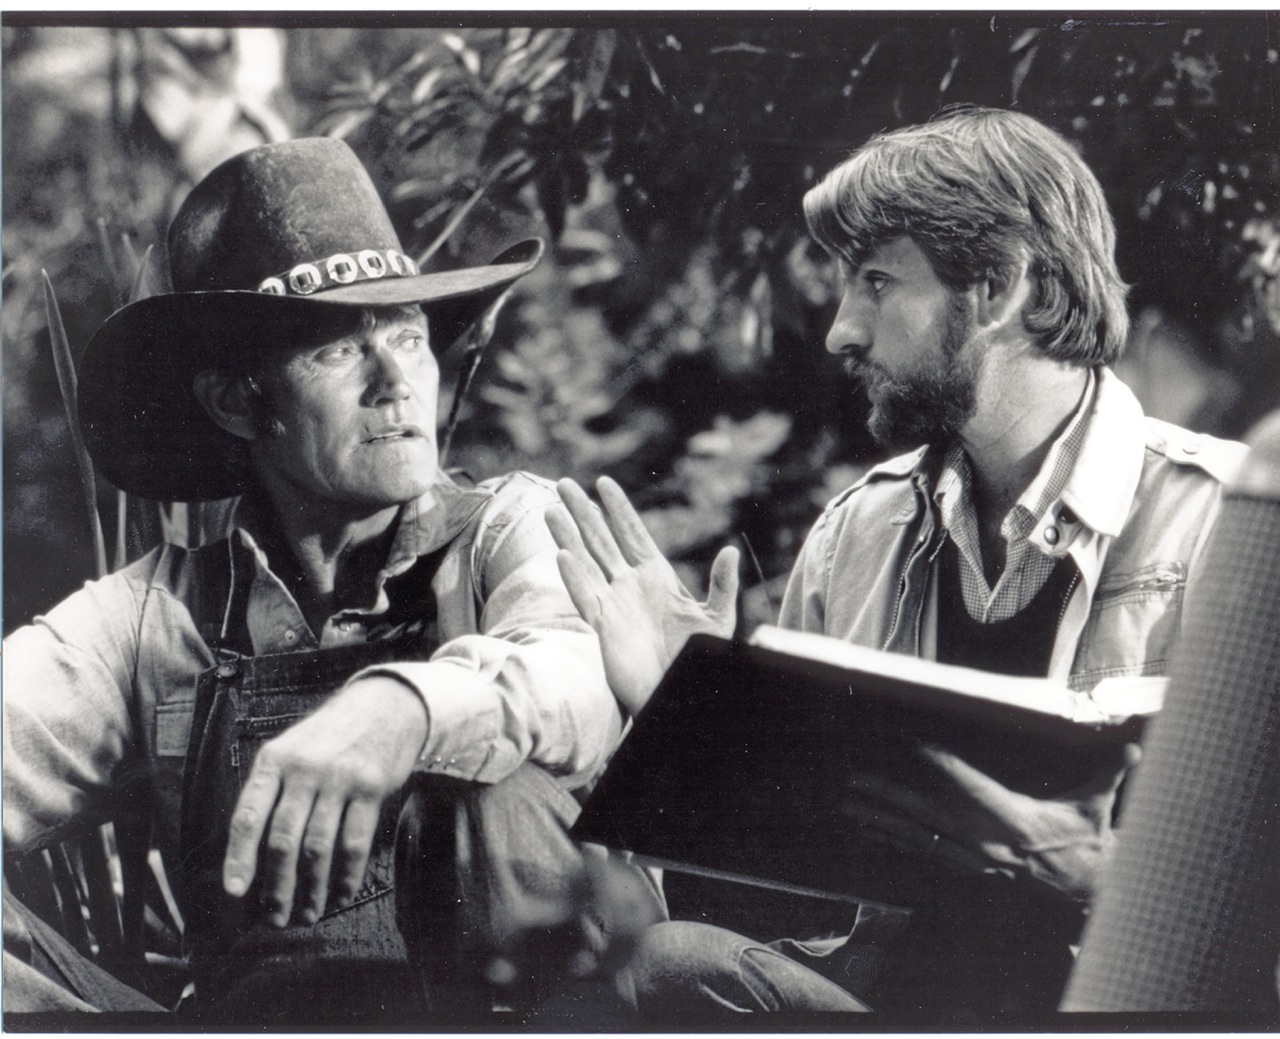 writer-director David Schmoeller and actor Chuck Connors on the set of TOURIST TRAP, 1978, Los Angeles